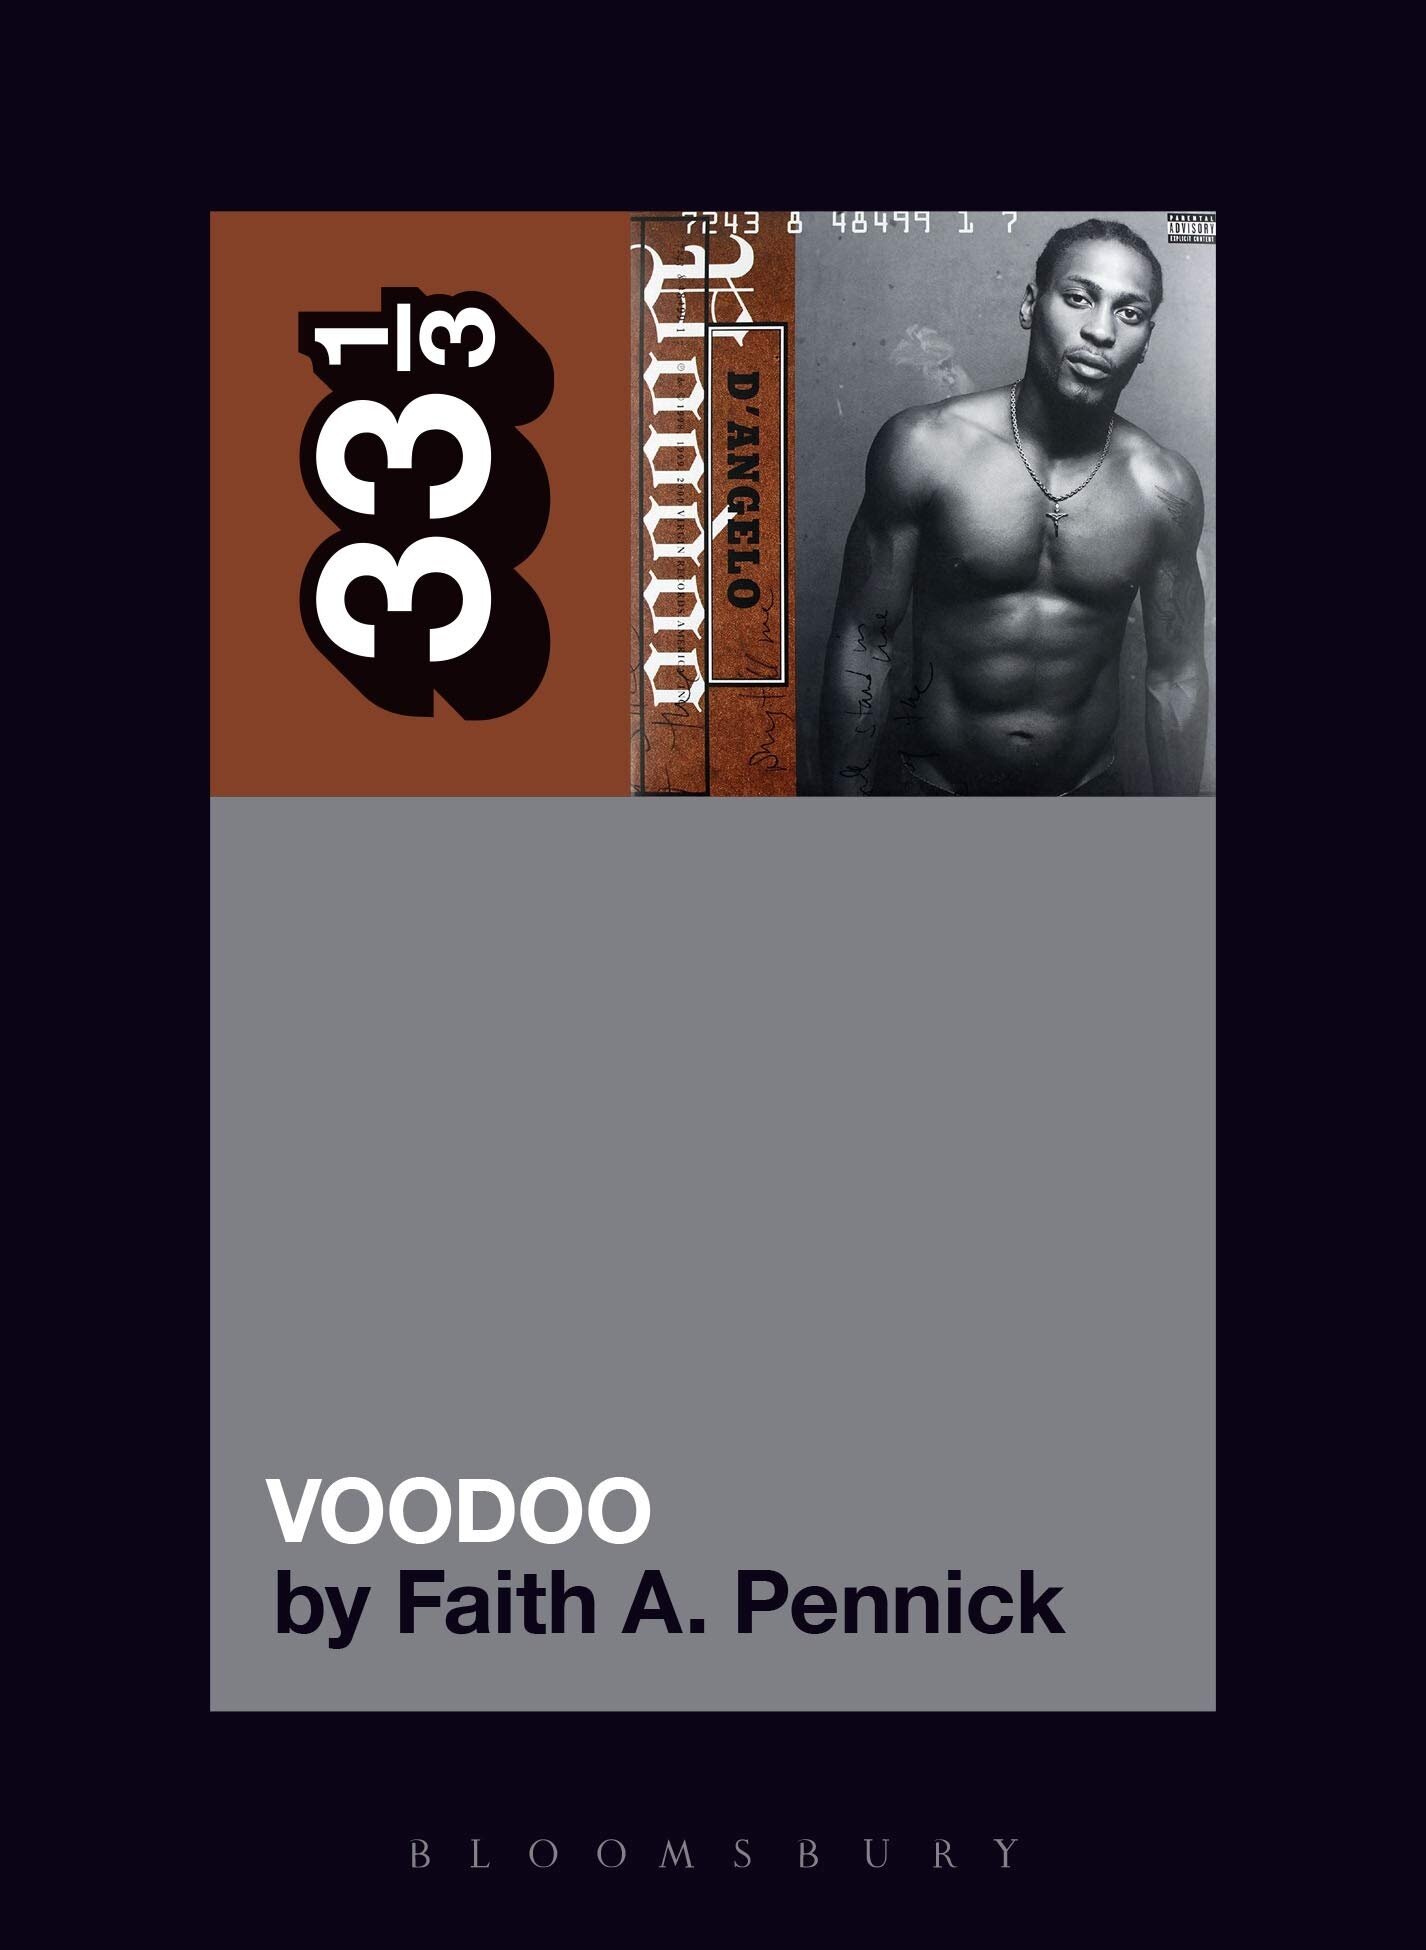 33 1/3: Voodoo by Faith A. Pennick Review